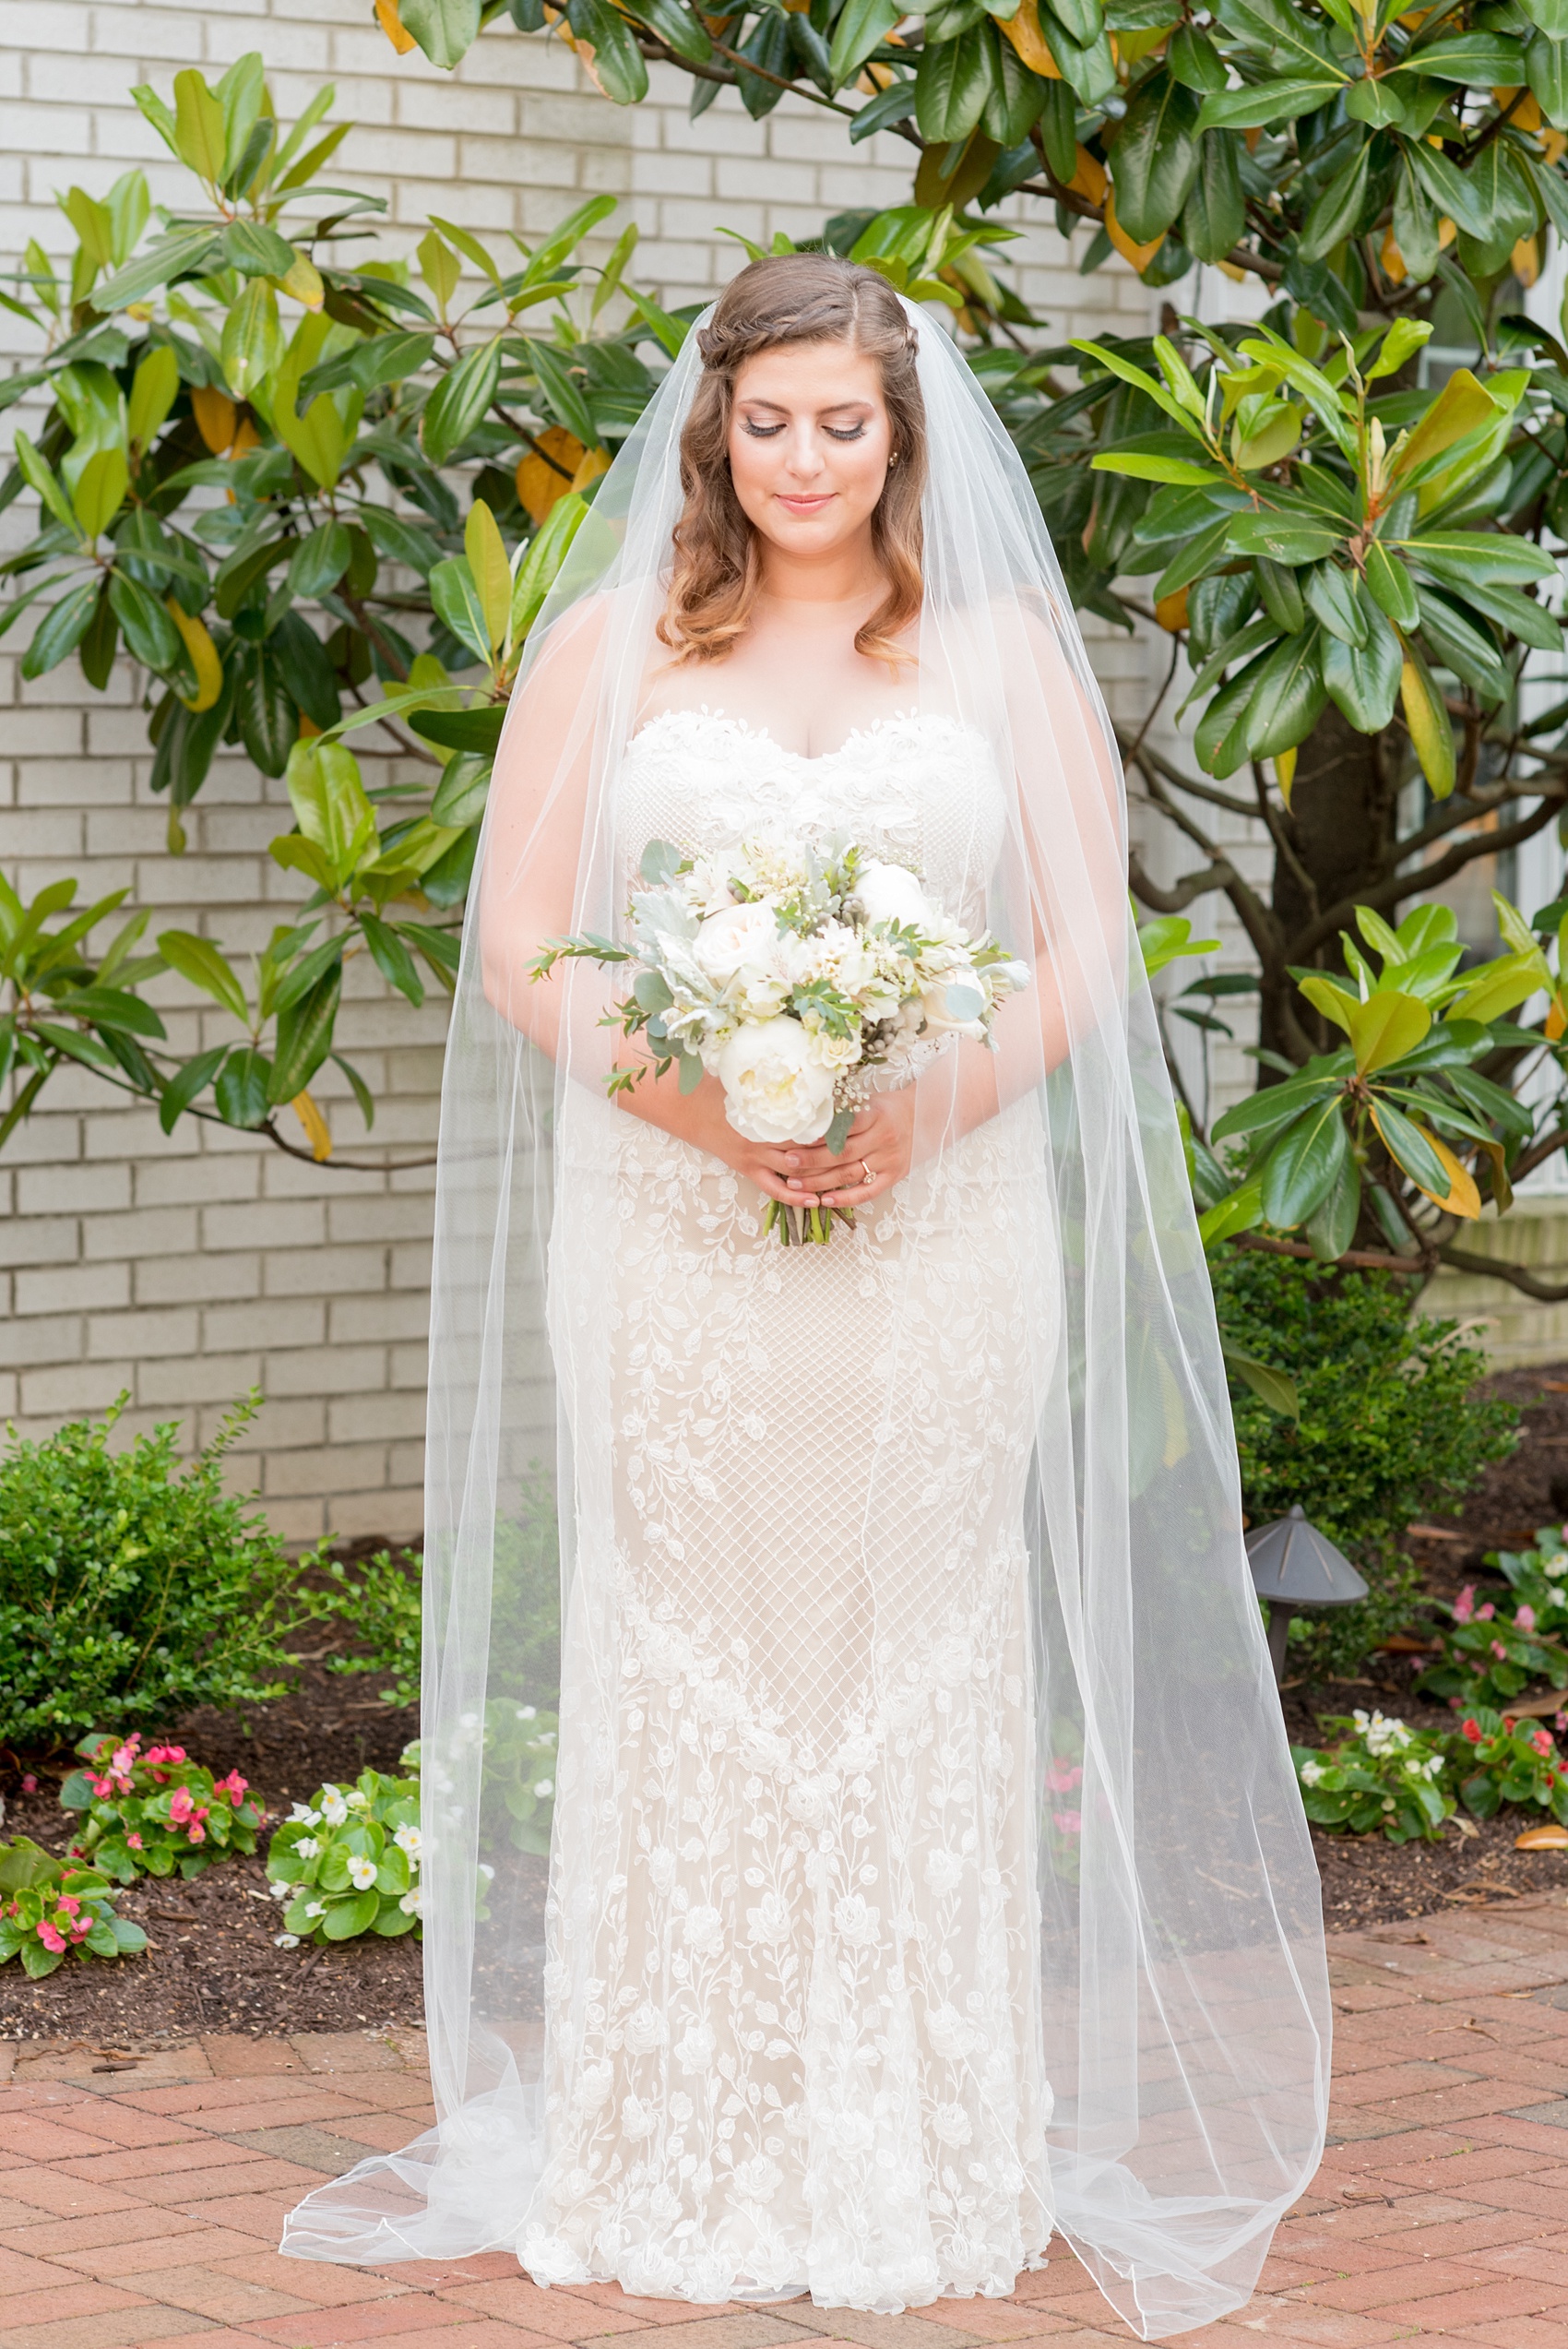 Mikkel Paige Photography photo of a wedding at the Madison Hotel in NJ. Image of the bride in her veil and fitted, beaded BHLDN gown.